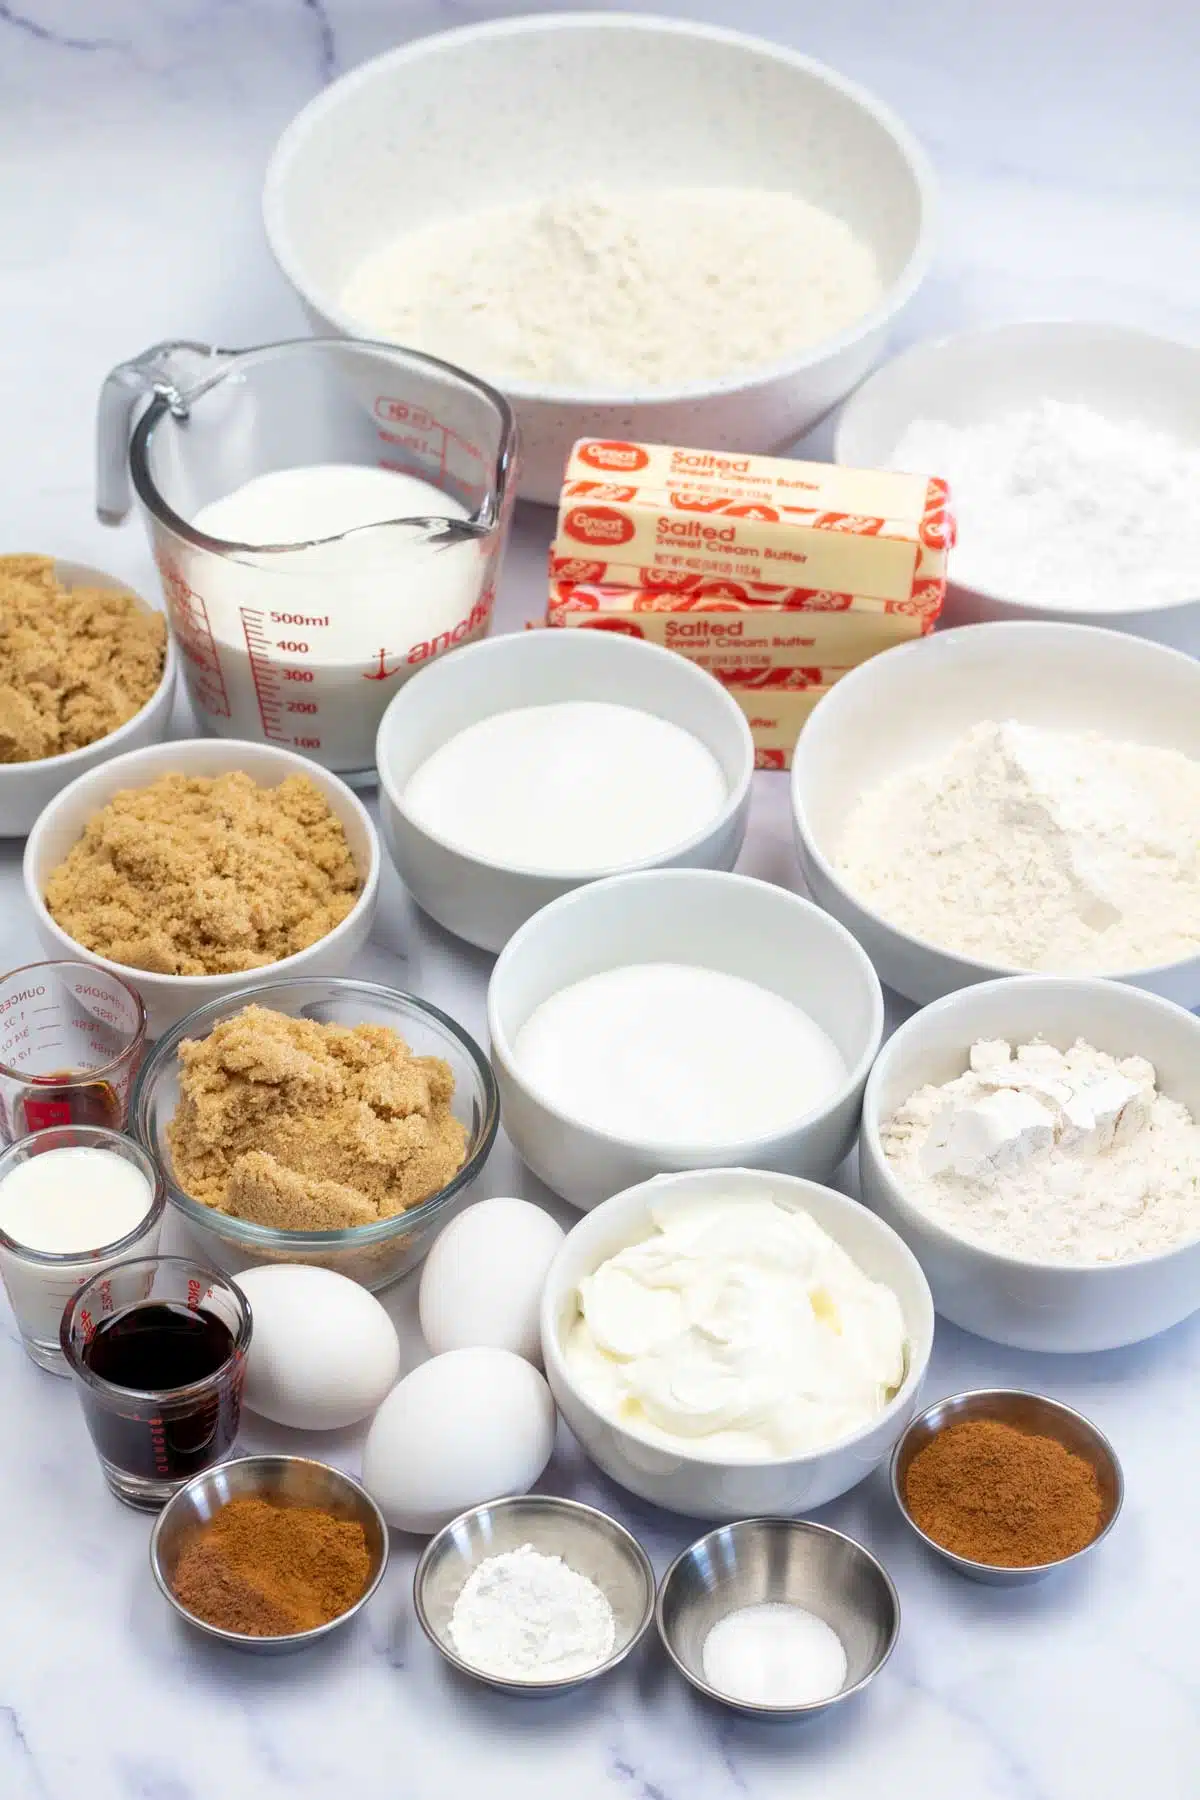 Tall image showing coffee cake ingredients.